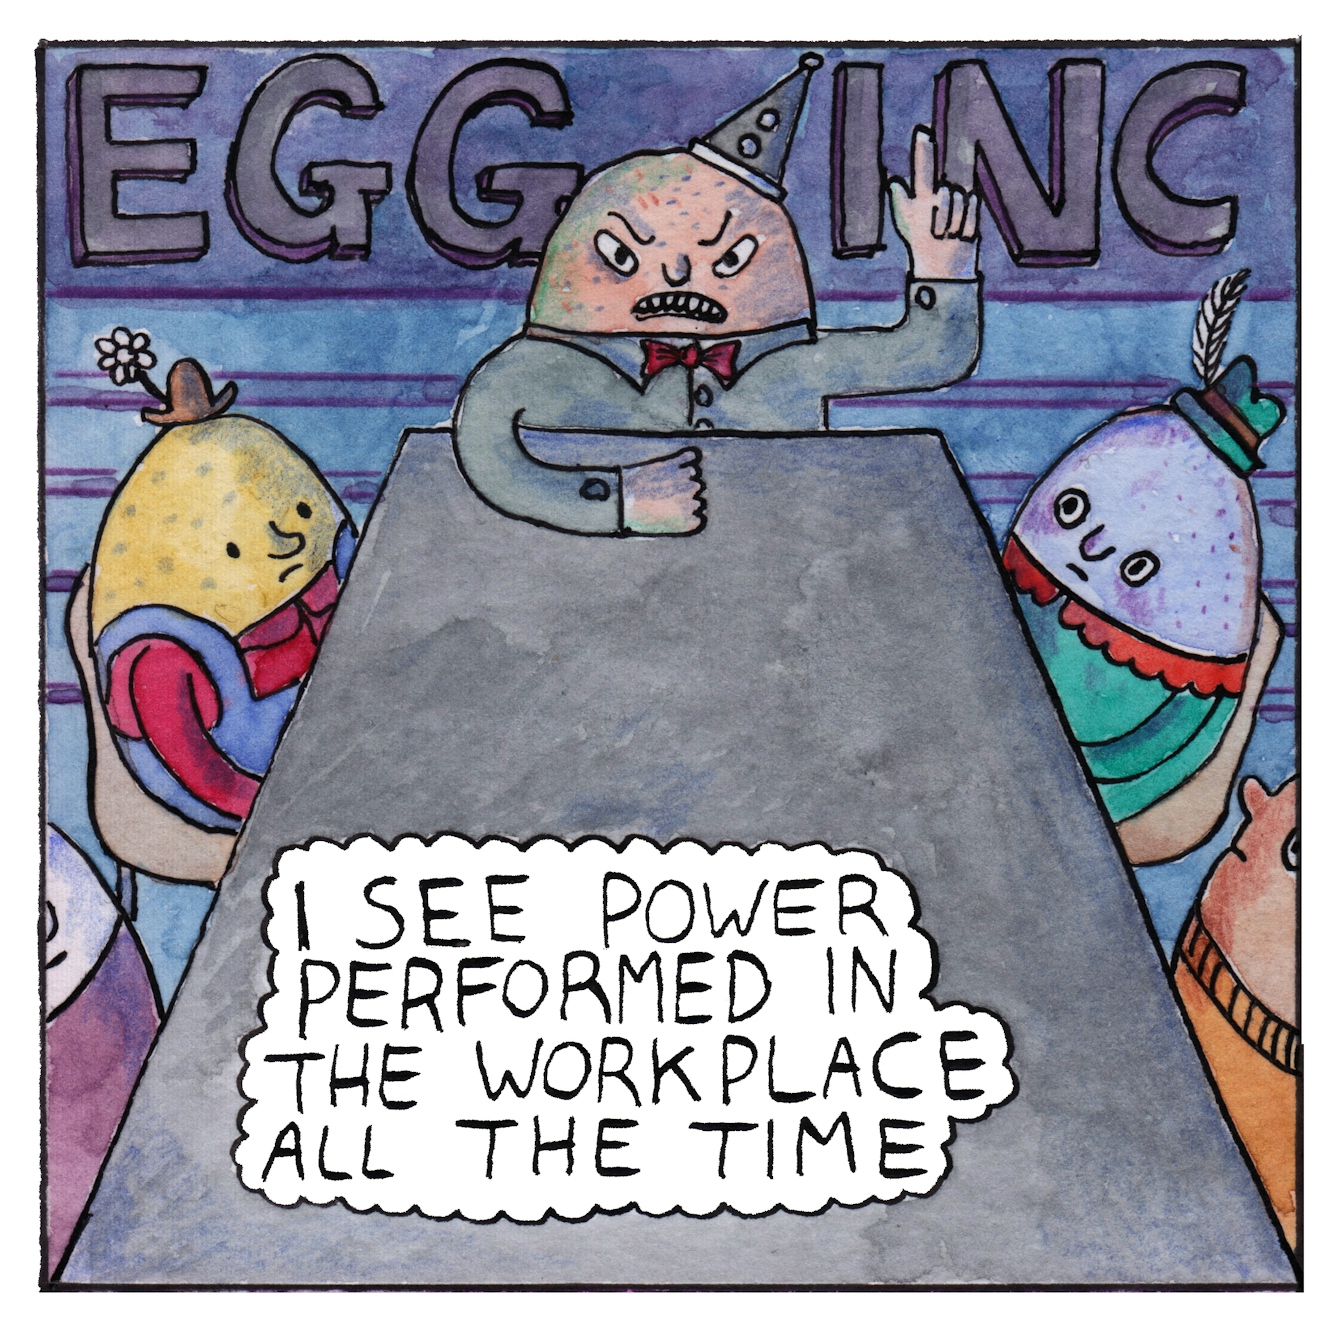 Panel 1 of comic 'Egg Inc.': A corporate boardroom has the words 'EGG INC' displayed on the wall behind a rectangular table that takes up most of the panel. Five egg-shaped characters are seated at the table. The one at the head of the table looks angry and in-charge. It has one arm resting on the table with a clenched fist. The other arm is raised, with the index finger and thumb of the hand pointed upwards. The text bubble reads: "I see power perfromed in the workplace all the time."